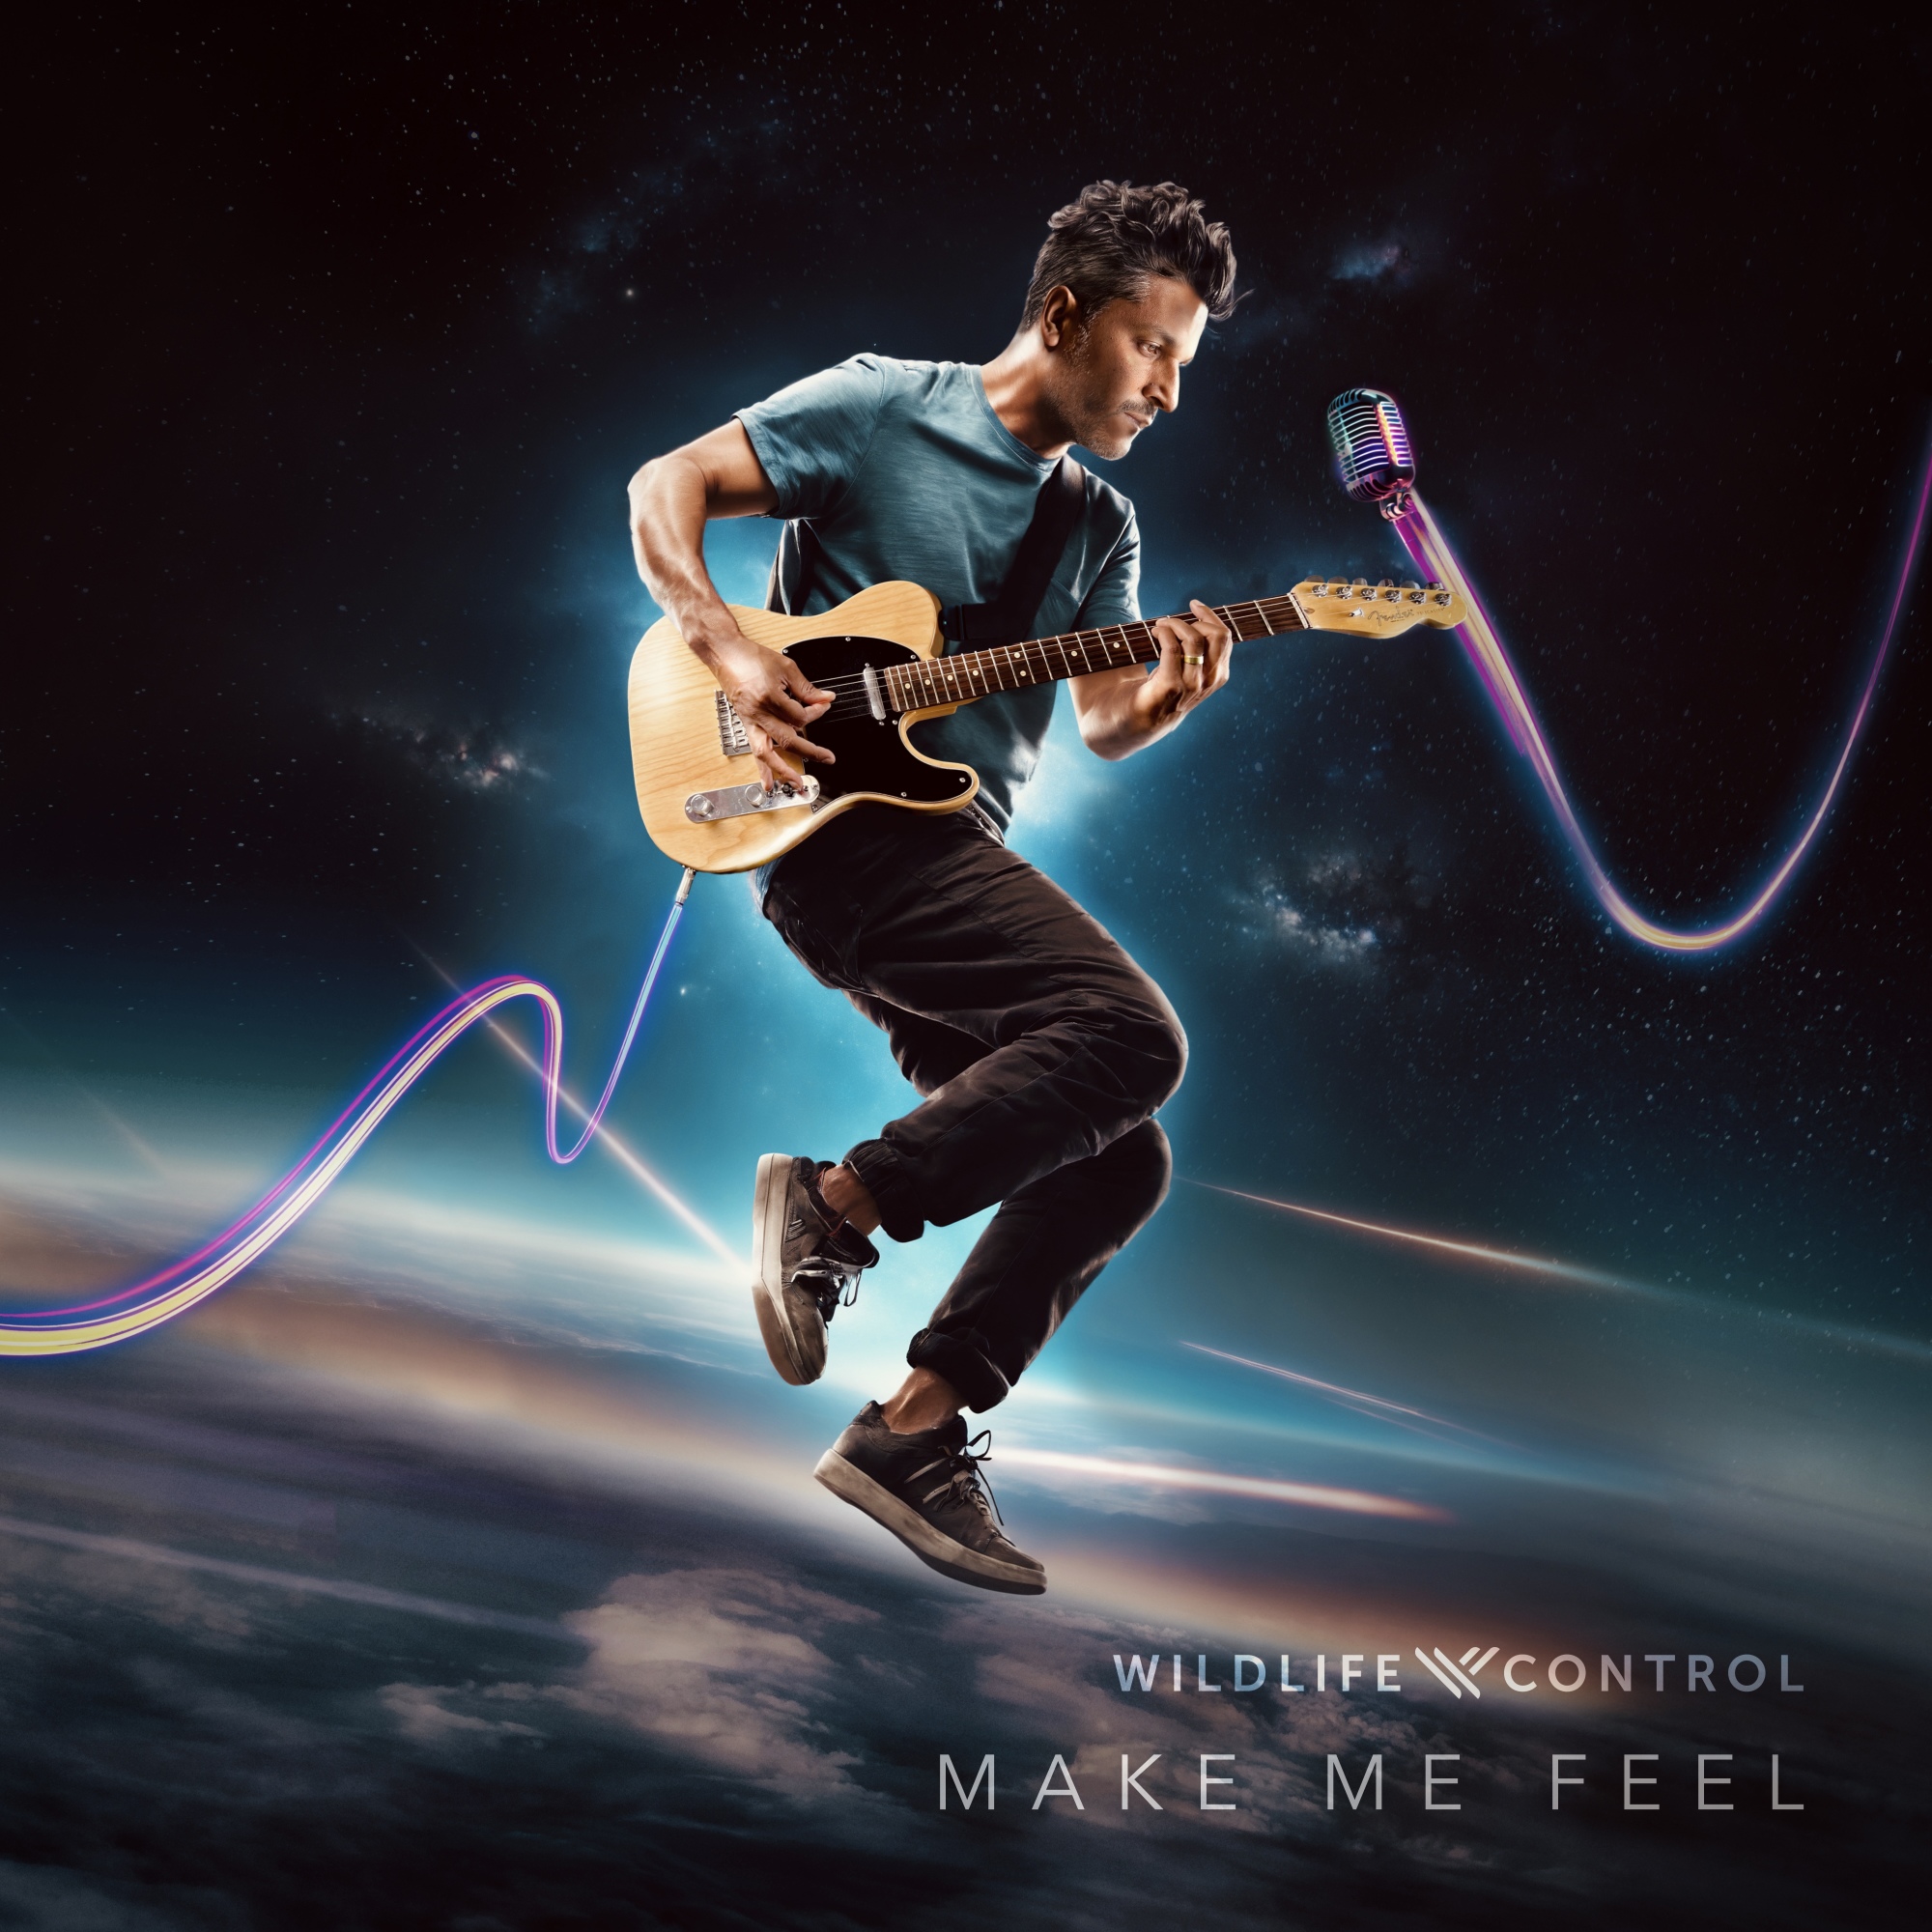 Cover art for "Make Me Feel" by Wildlife Control